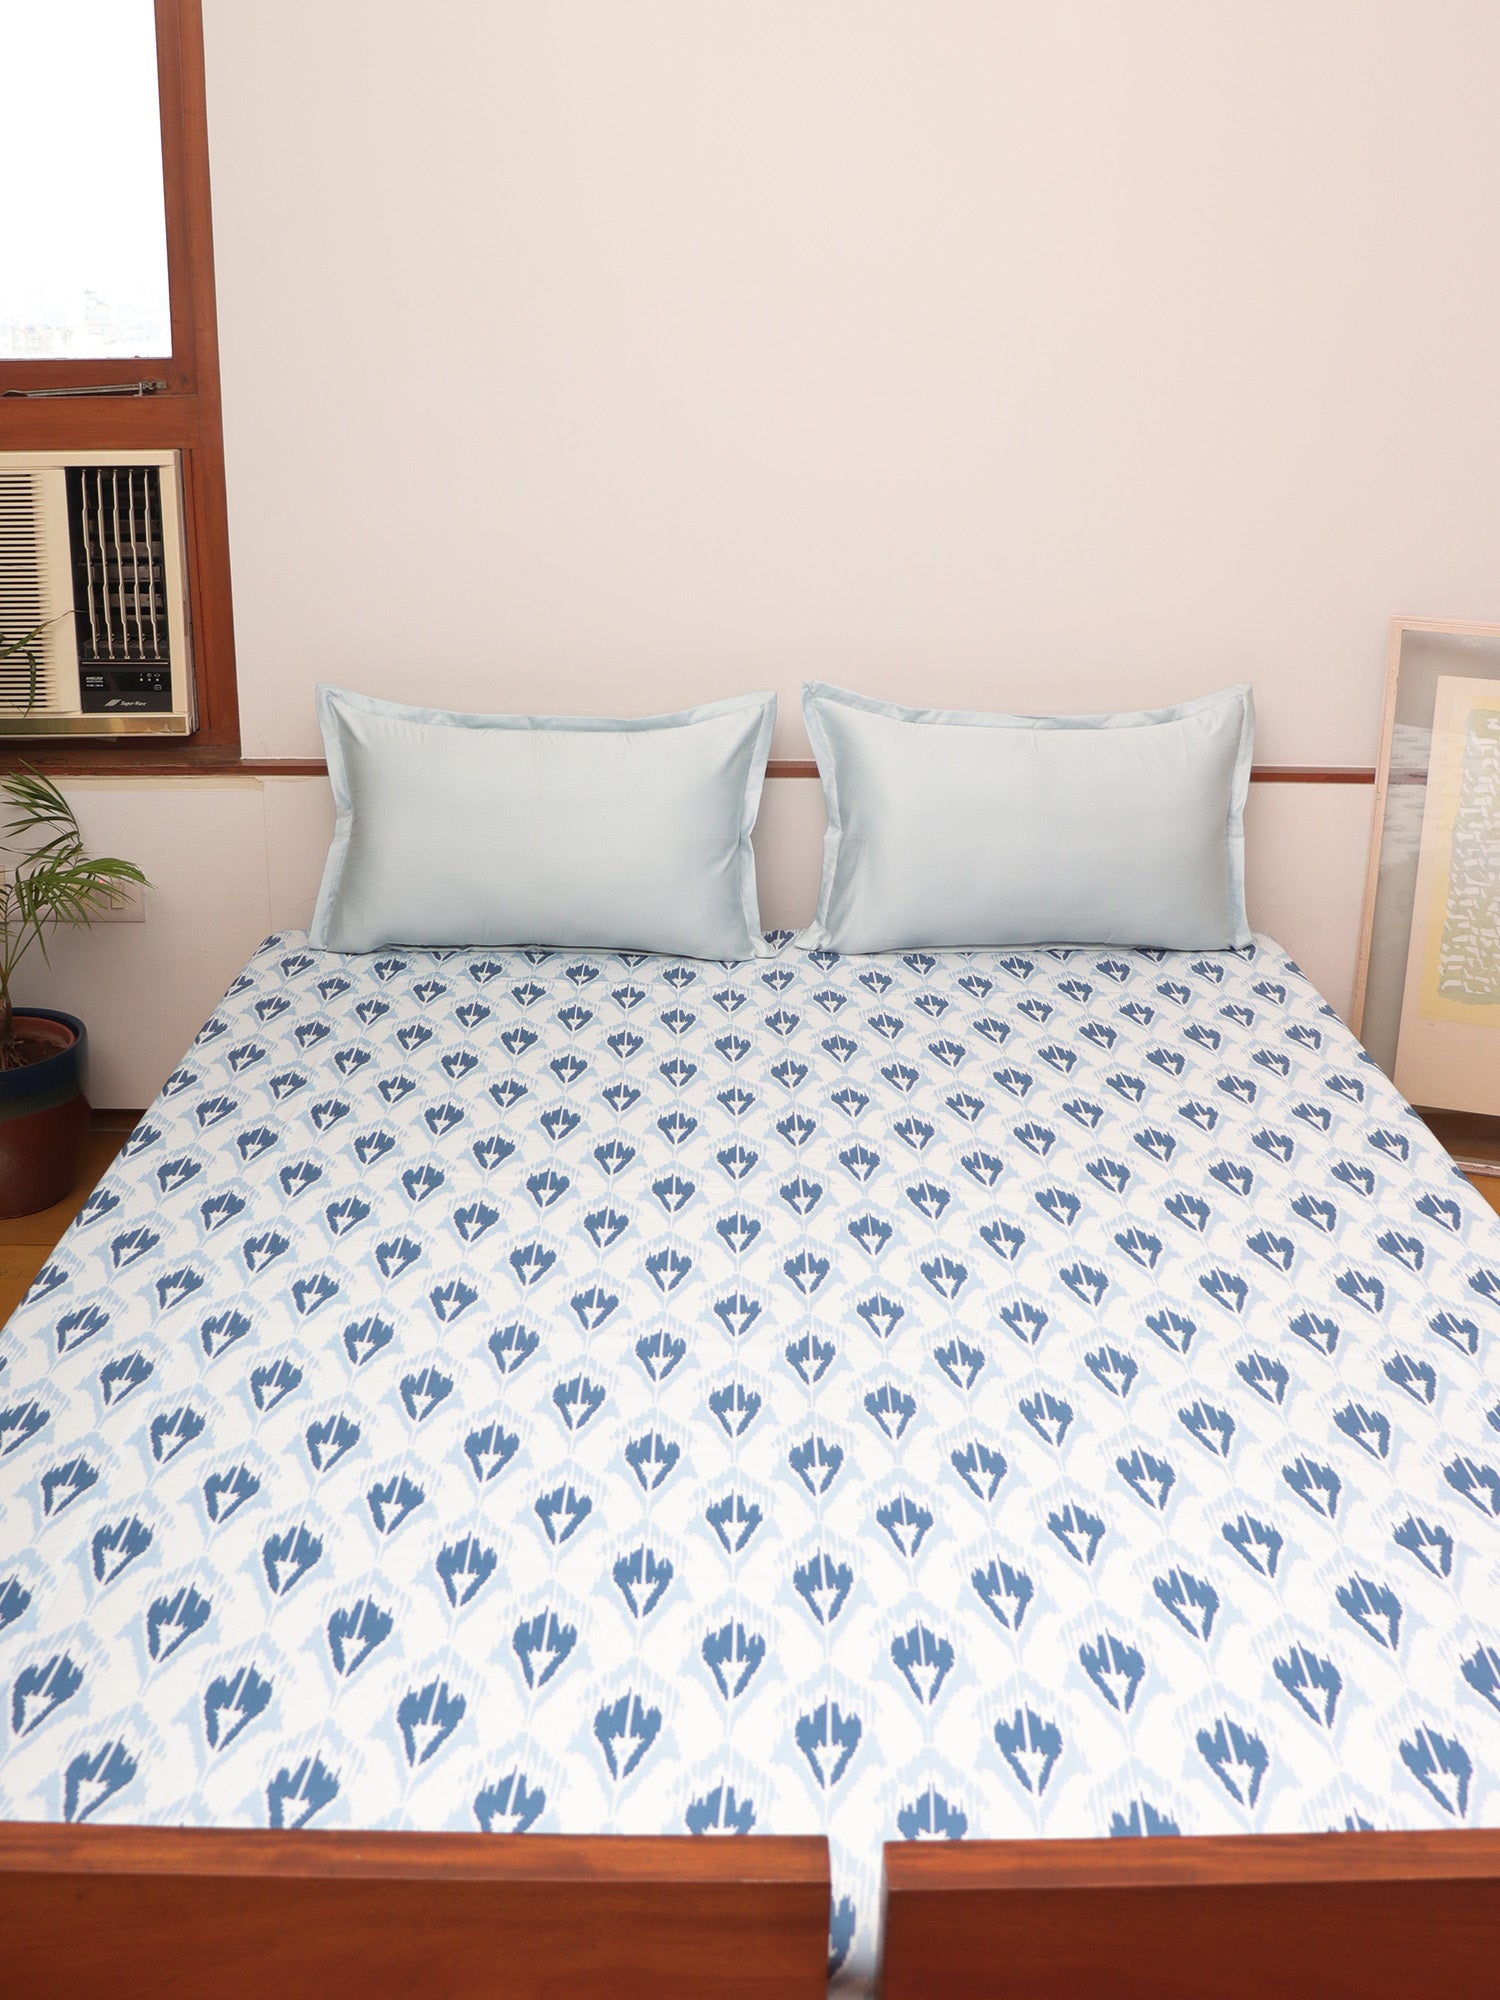 Printed Bedcover for Double Bed with 2 Pillow Covers | Queen Size - Blue Motif | Bedcover 90 x 108inches (7.5x9ft), Pillow Covers 17x27in